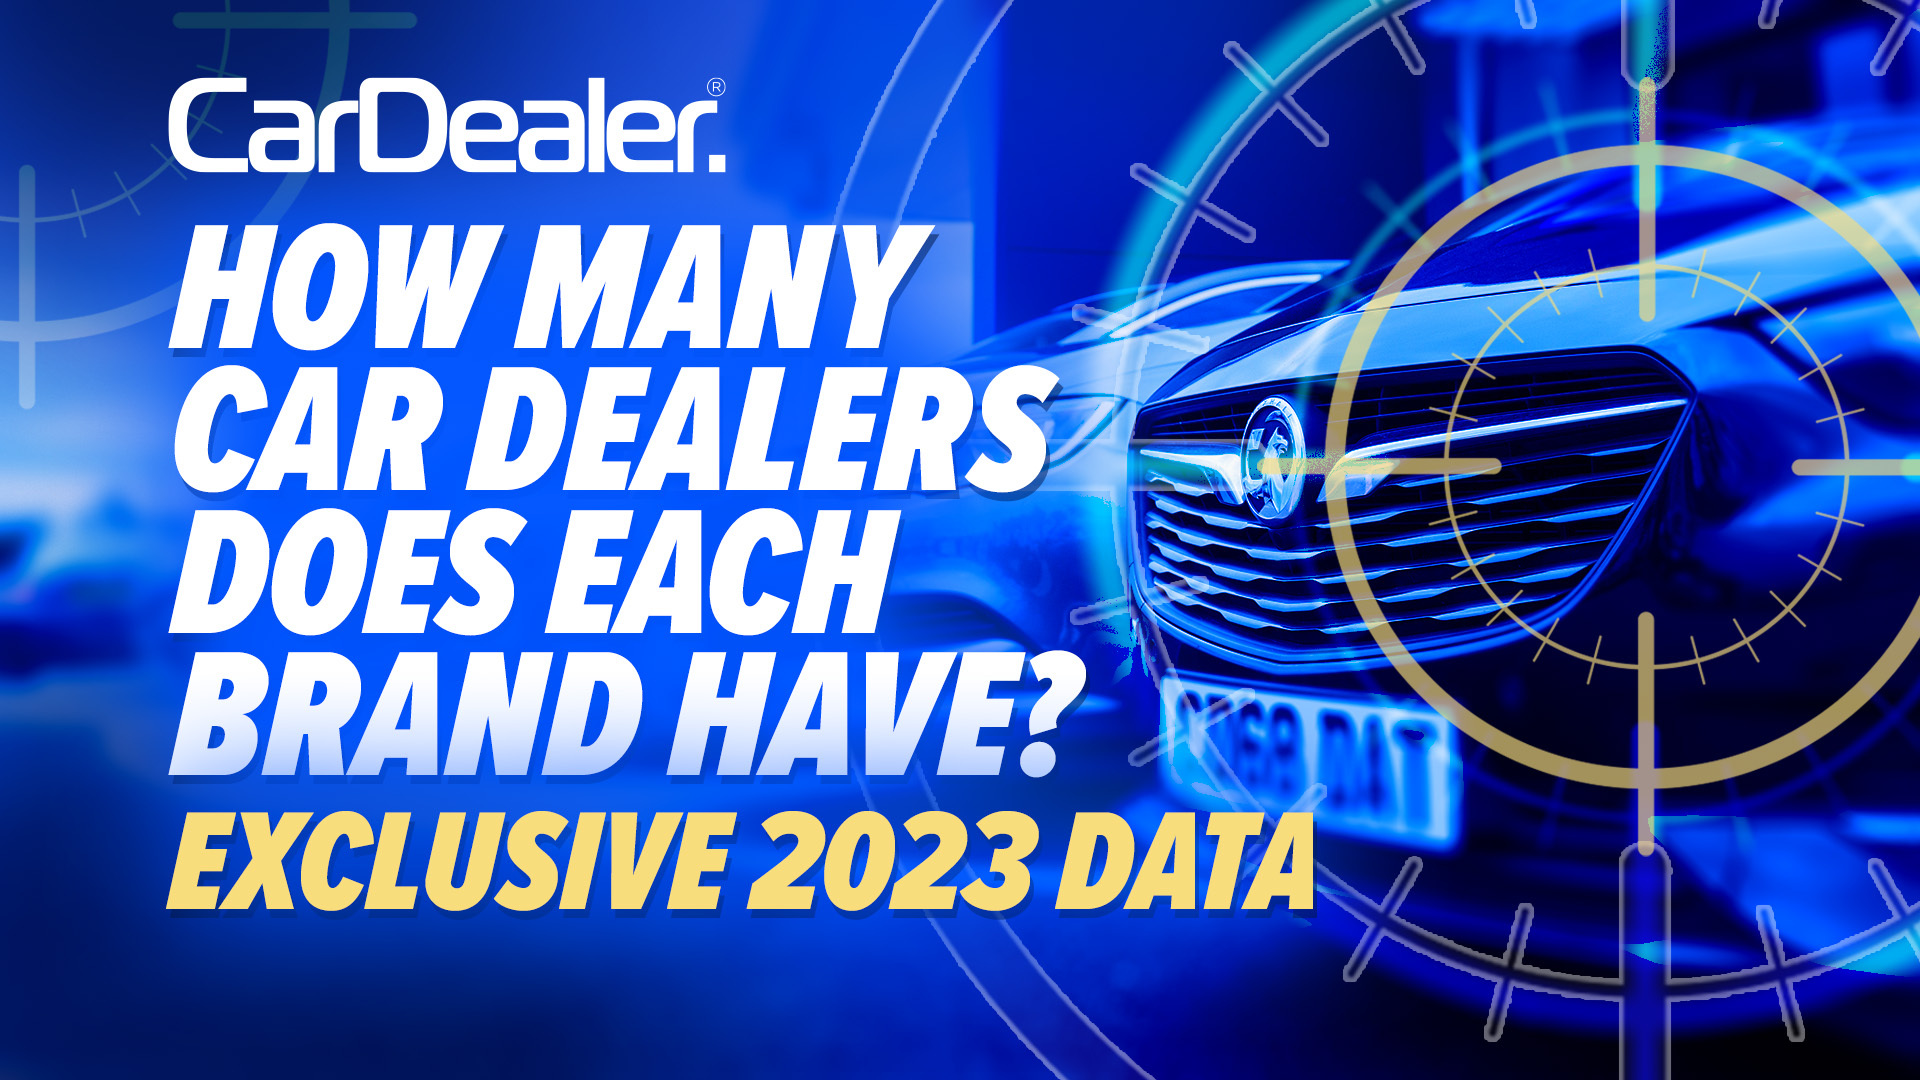 Dealers still critical to car buying as list of how many dealerships